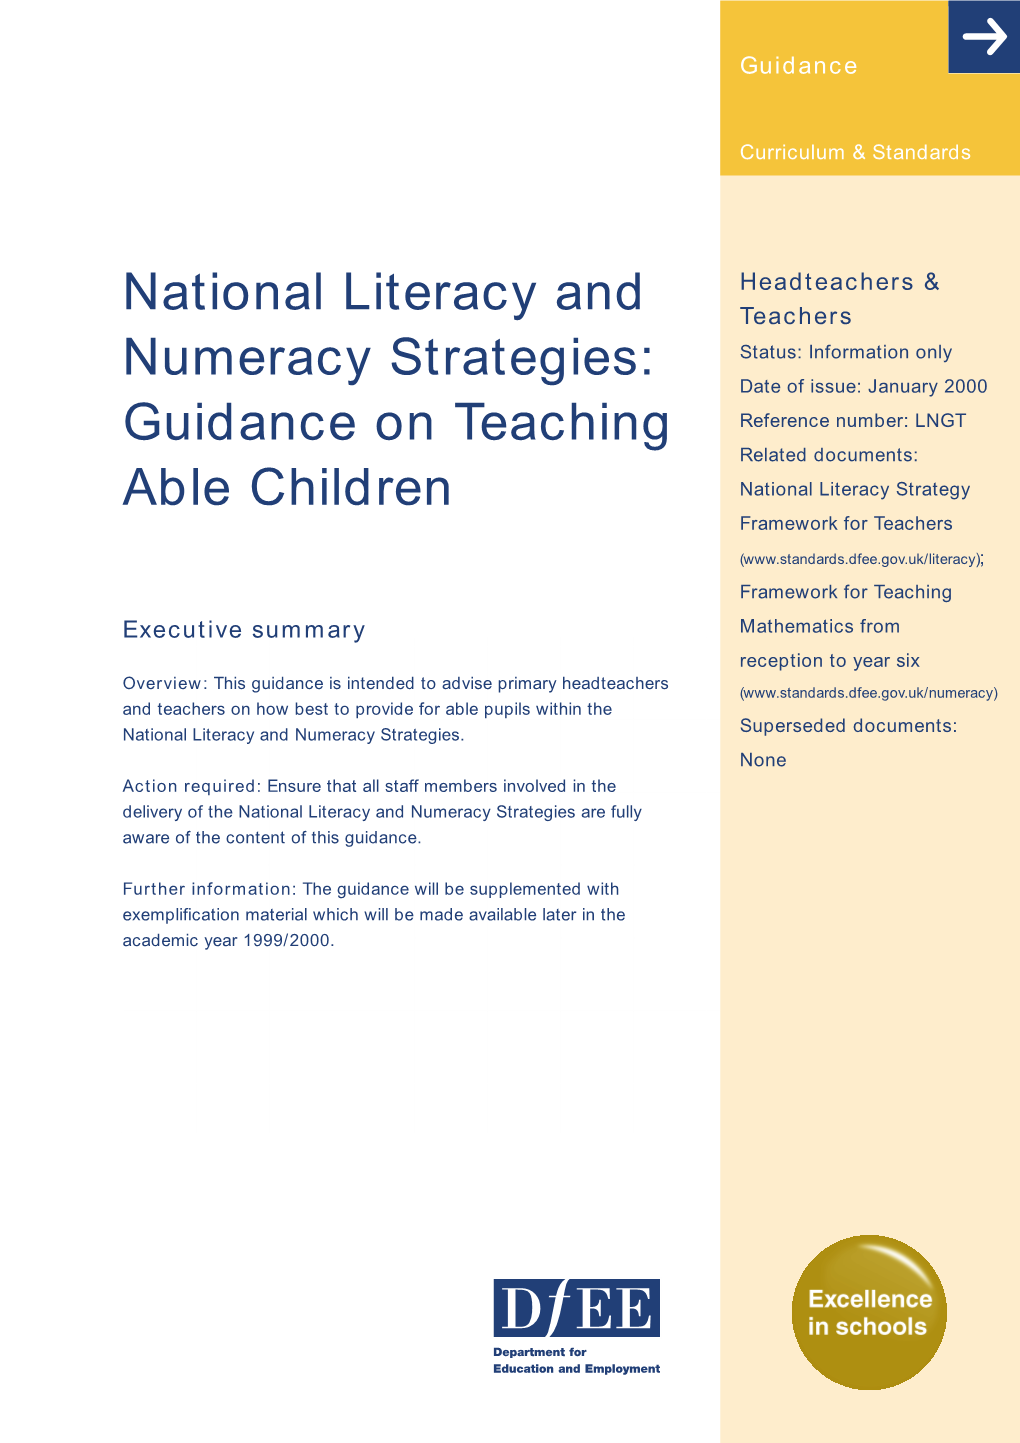 National Literacy and Numeracy Strategies: Guidance on Teaching Able Children